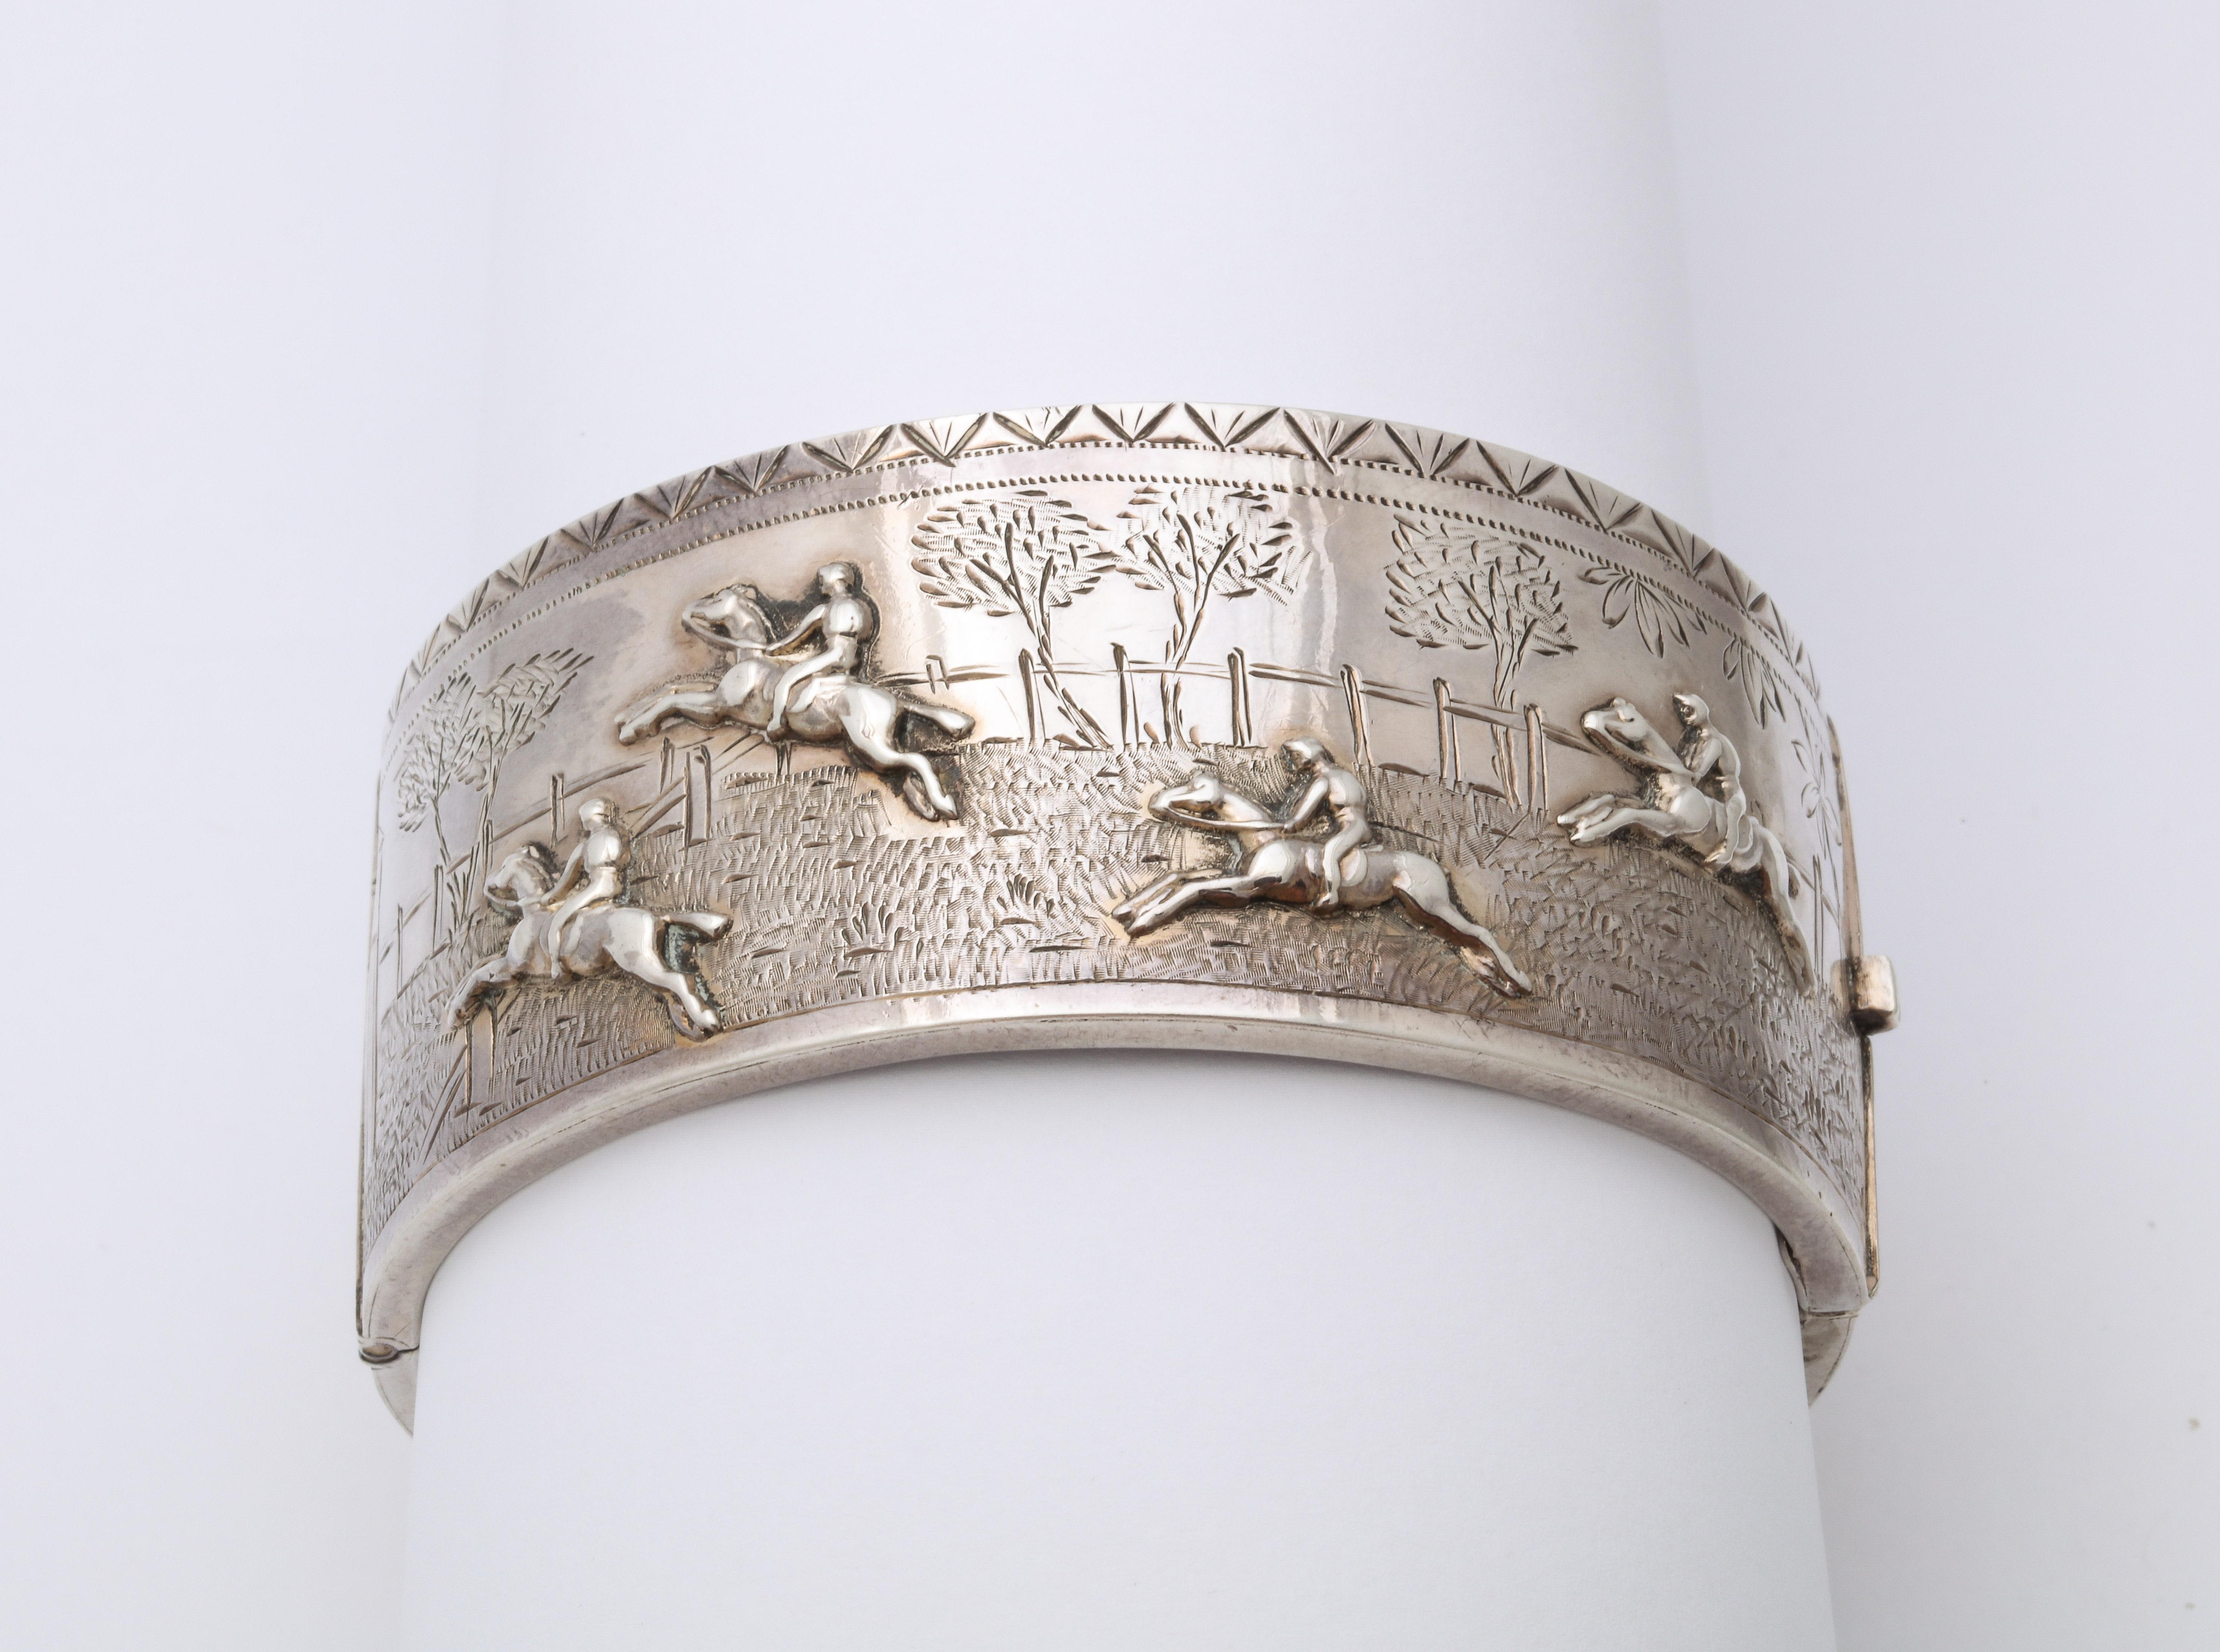 This is a scarce indeed, a sterling Victorian bracelet with a repousse landscape scene of trees, barn, running fences and horses jumping with their riders racing to a hunt. The raised engraving is so exciting that you can feel the speed of the